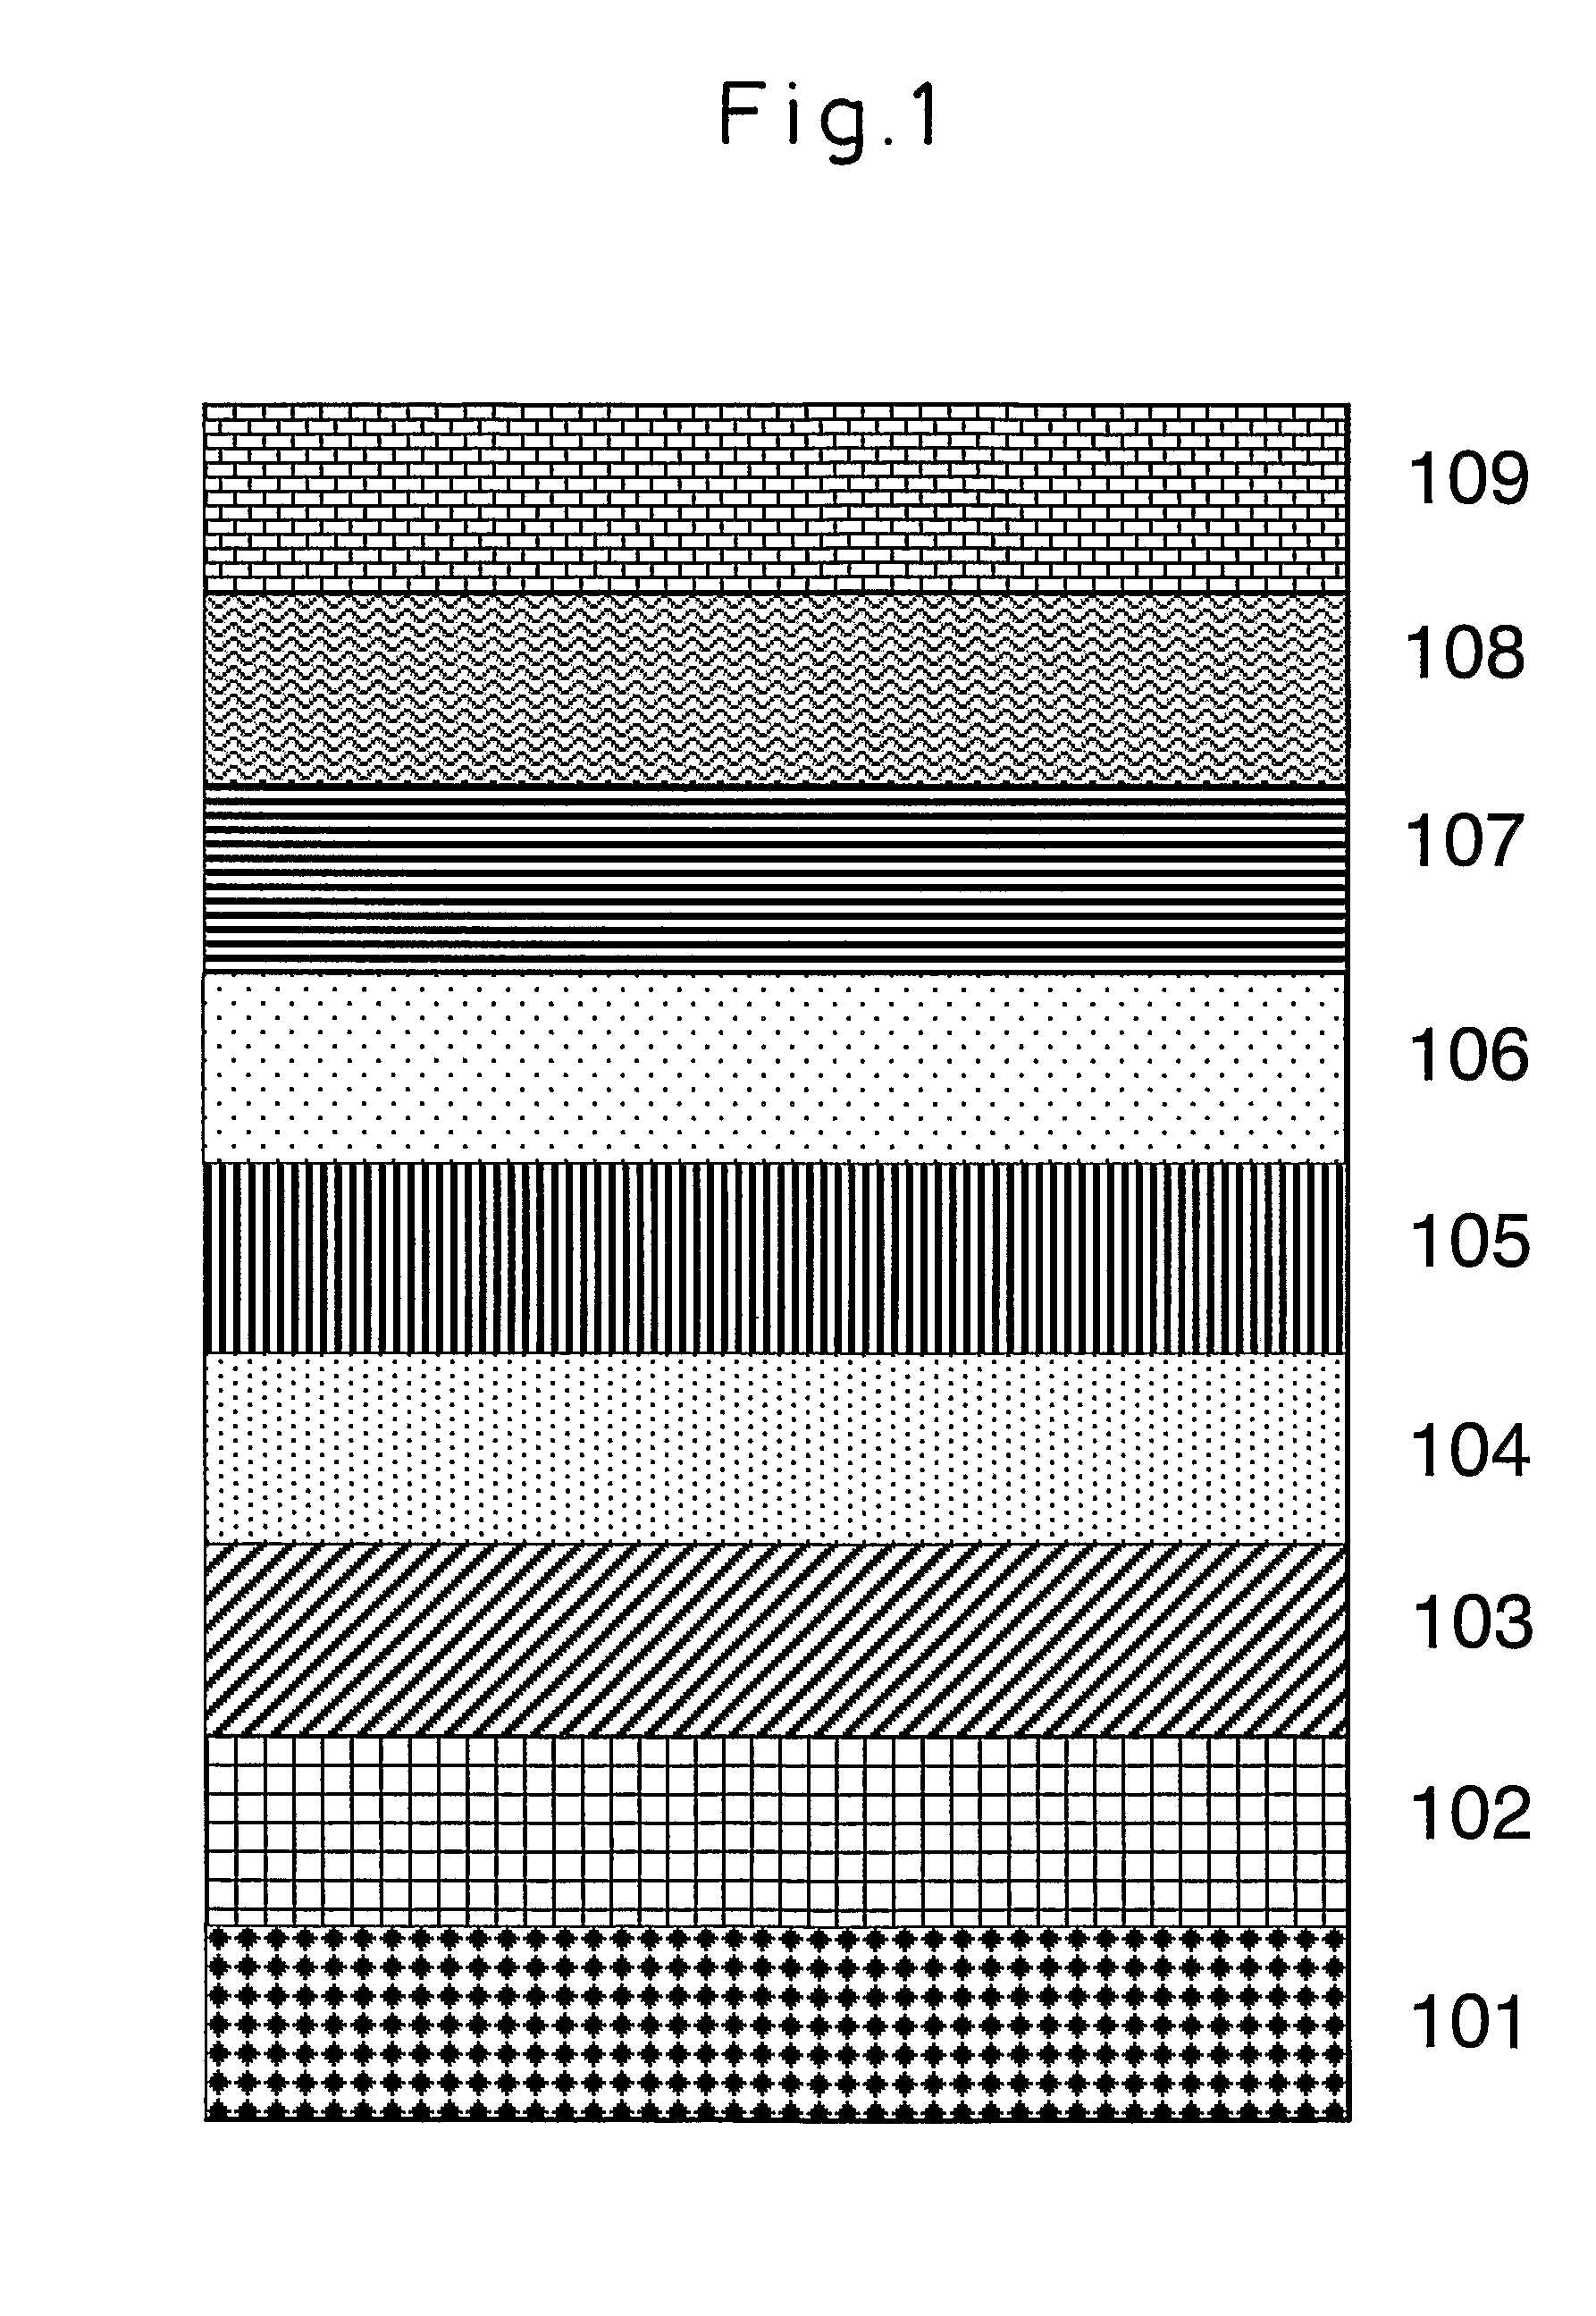 N-type group III nitride semiconductor stacked layer structure